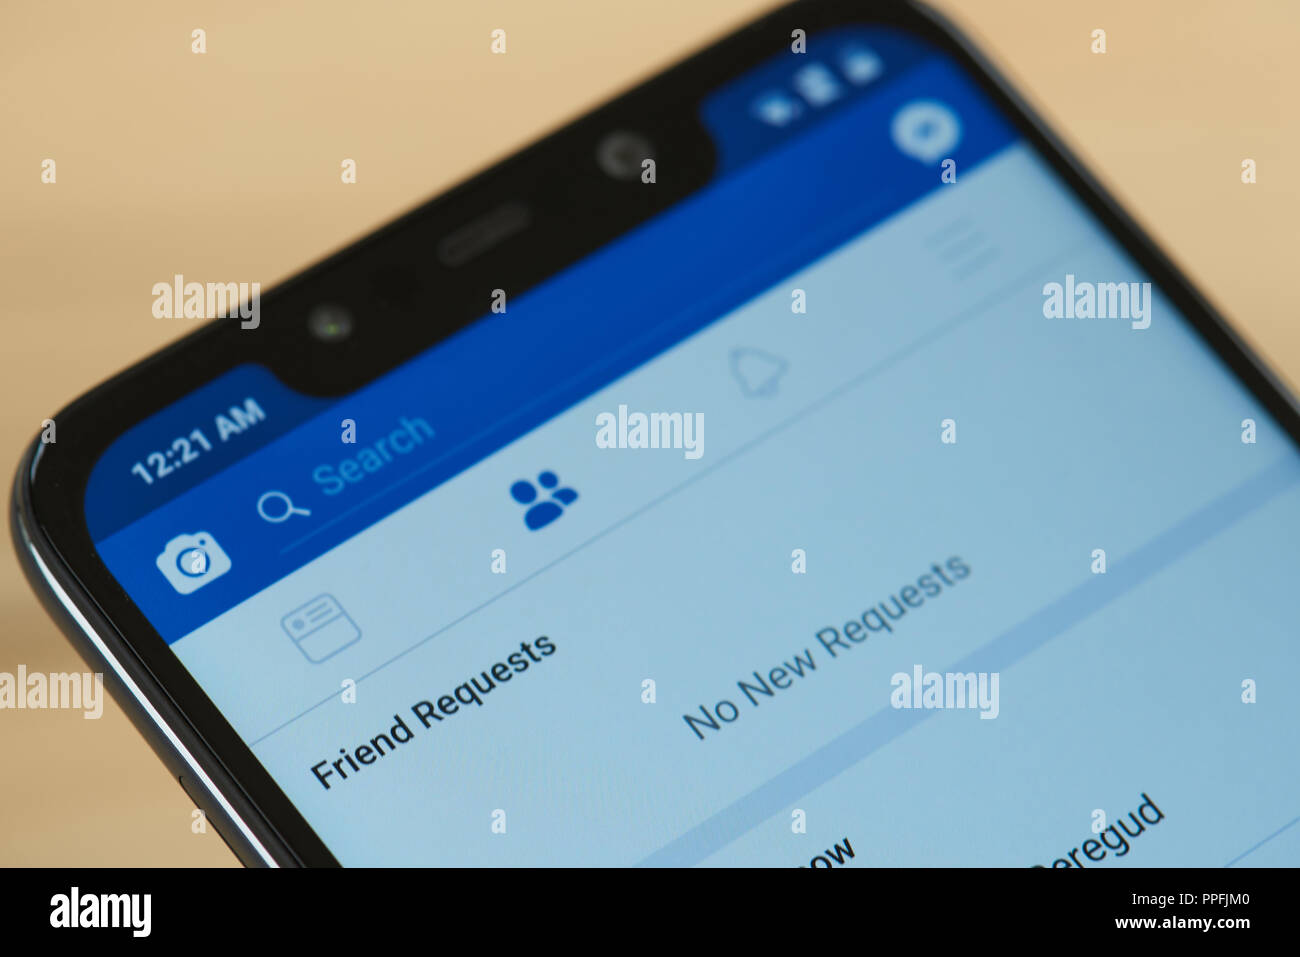 New york, USA - september 24, 2018: Friend request in Facebook on smartphone screen close up Stock Photo